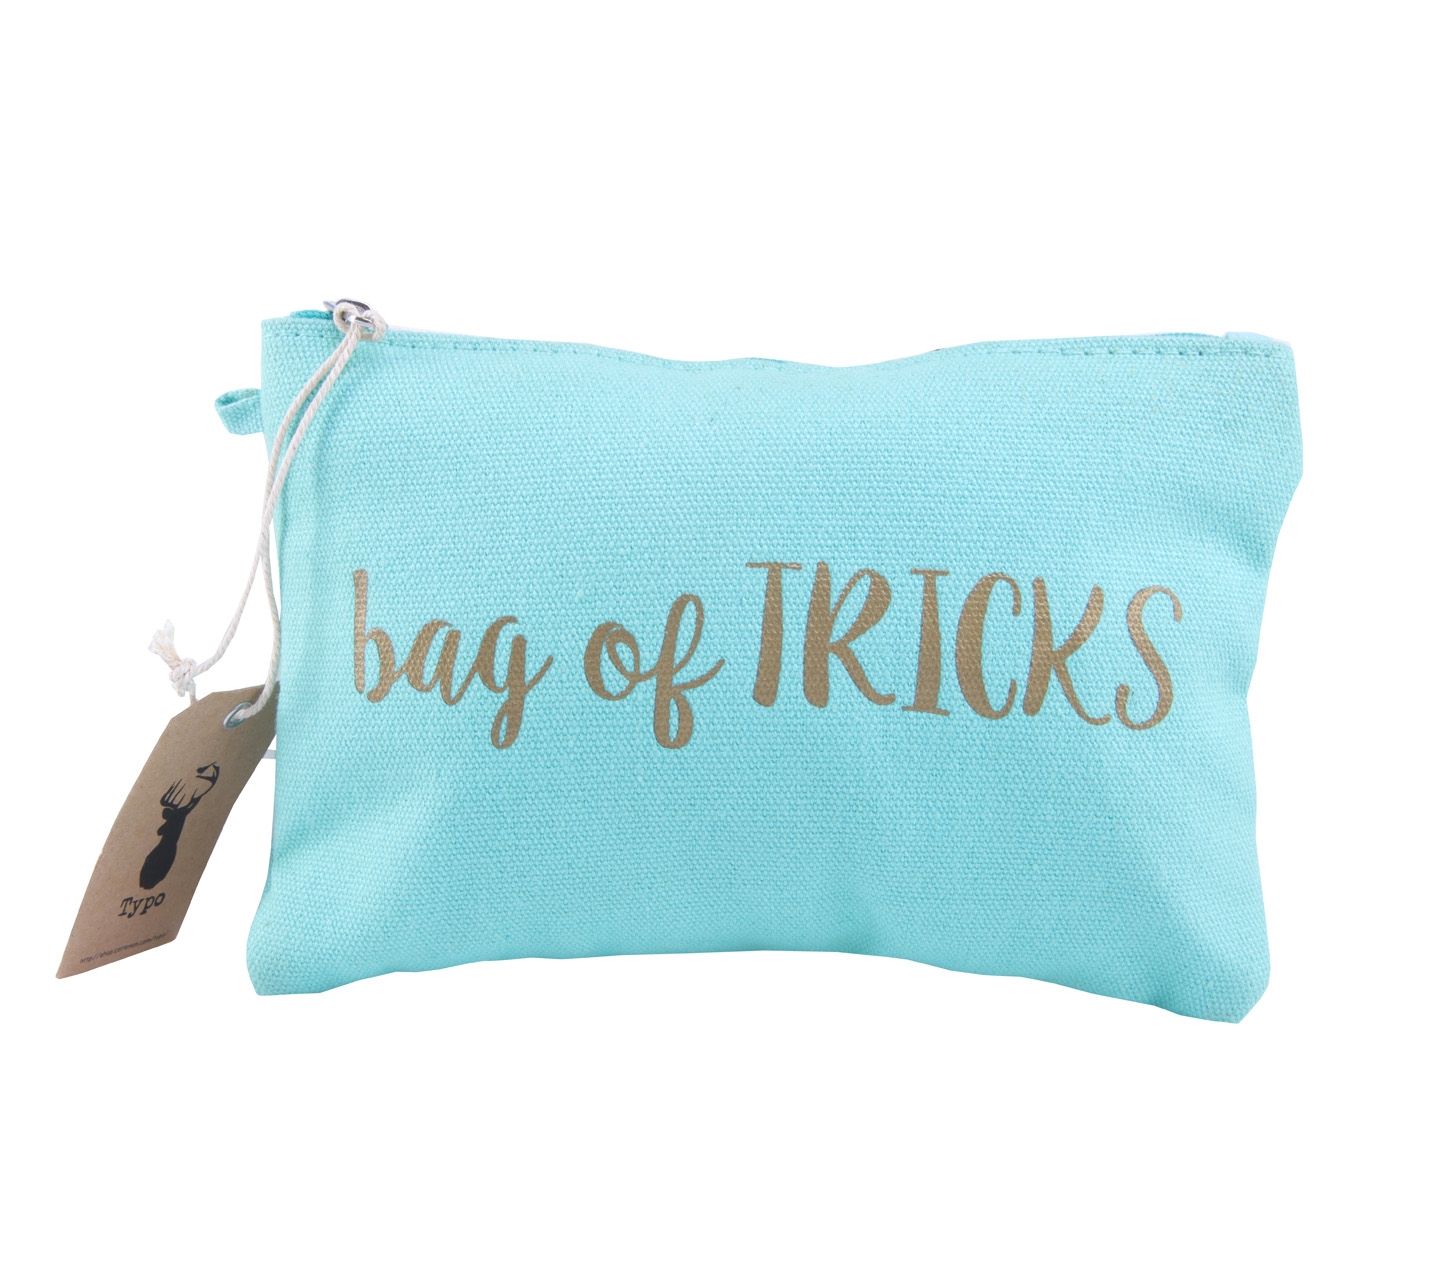 Typo Light Green Bag of TRICKS Pouch